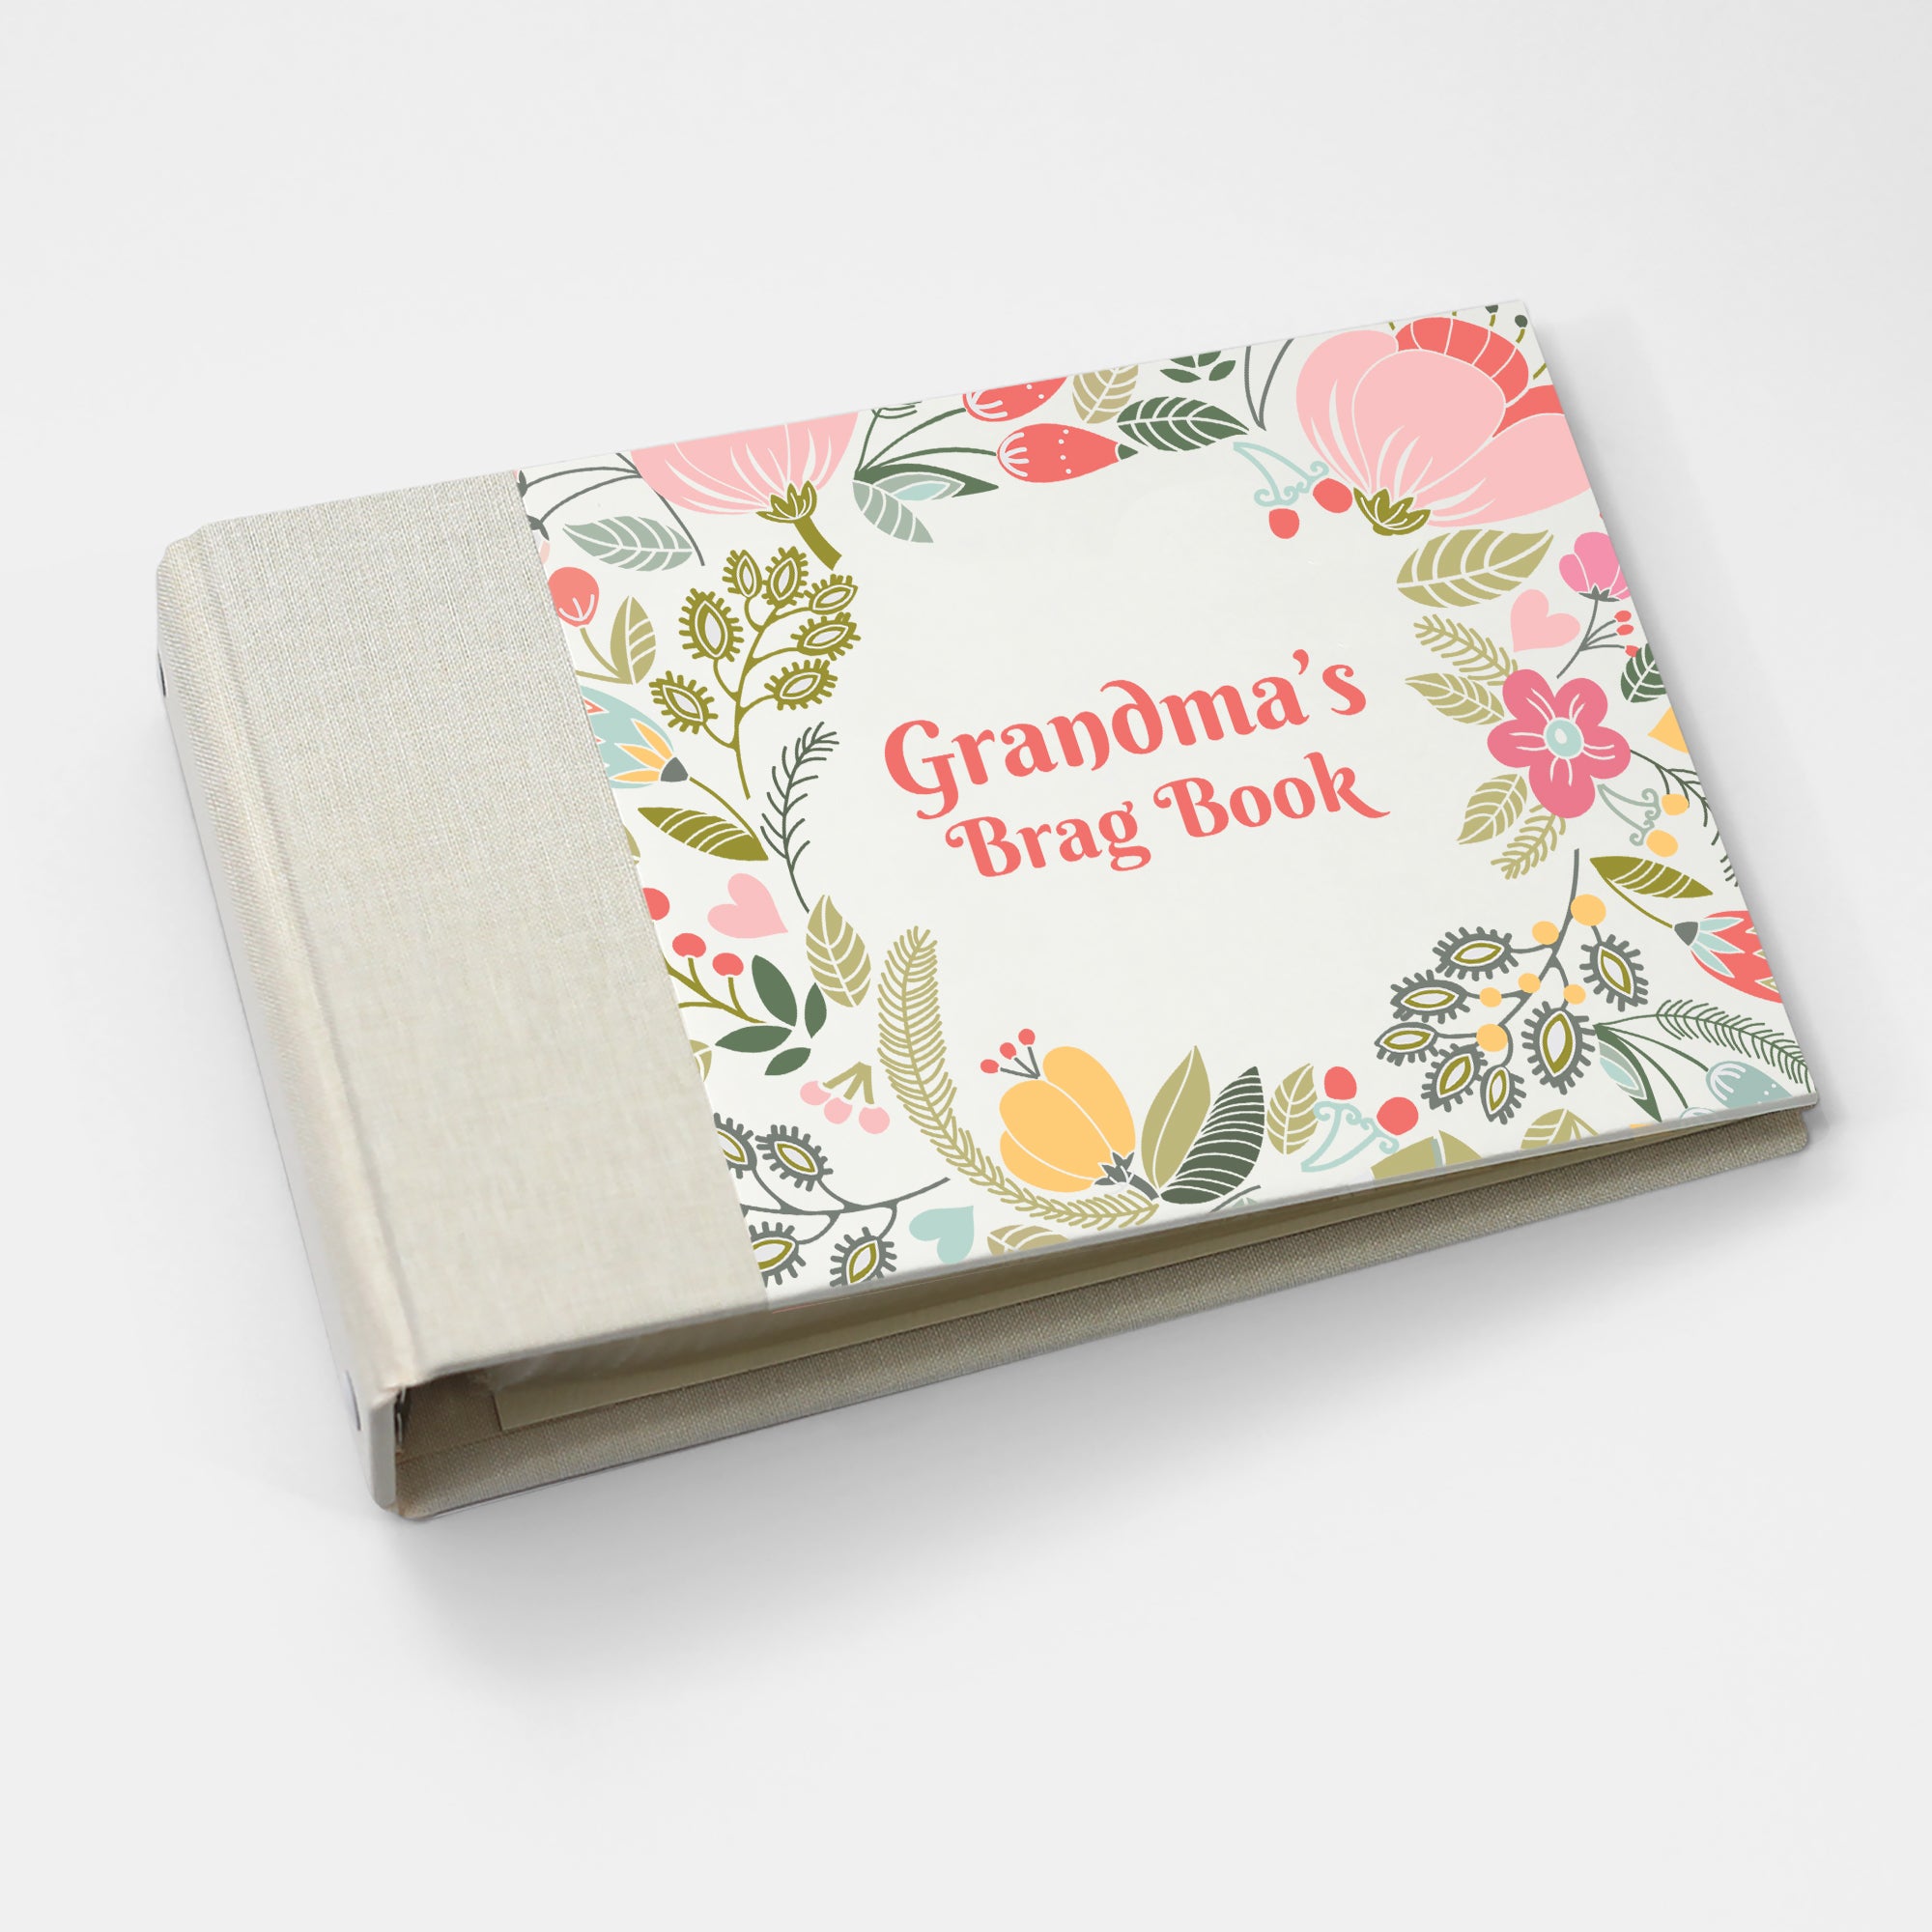 Stunning 4x6 Photo Albums For Your Precious Pictures 